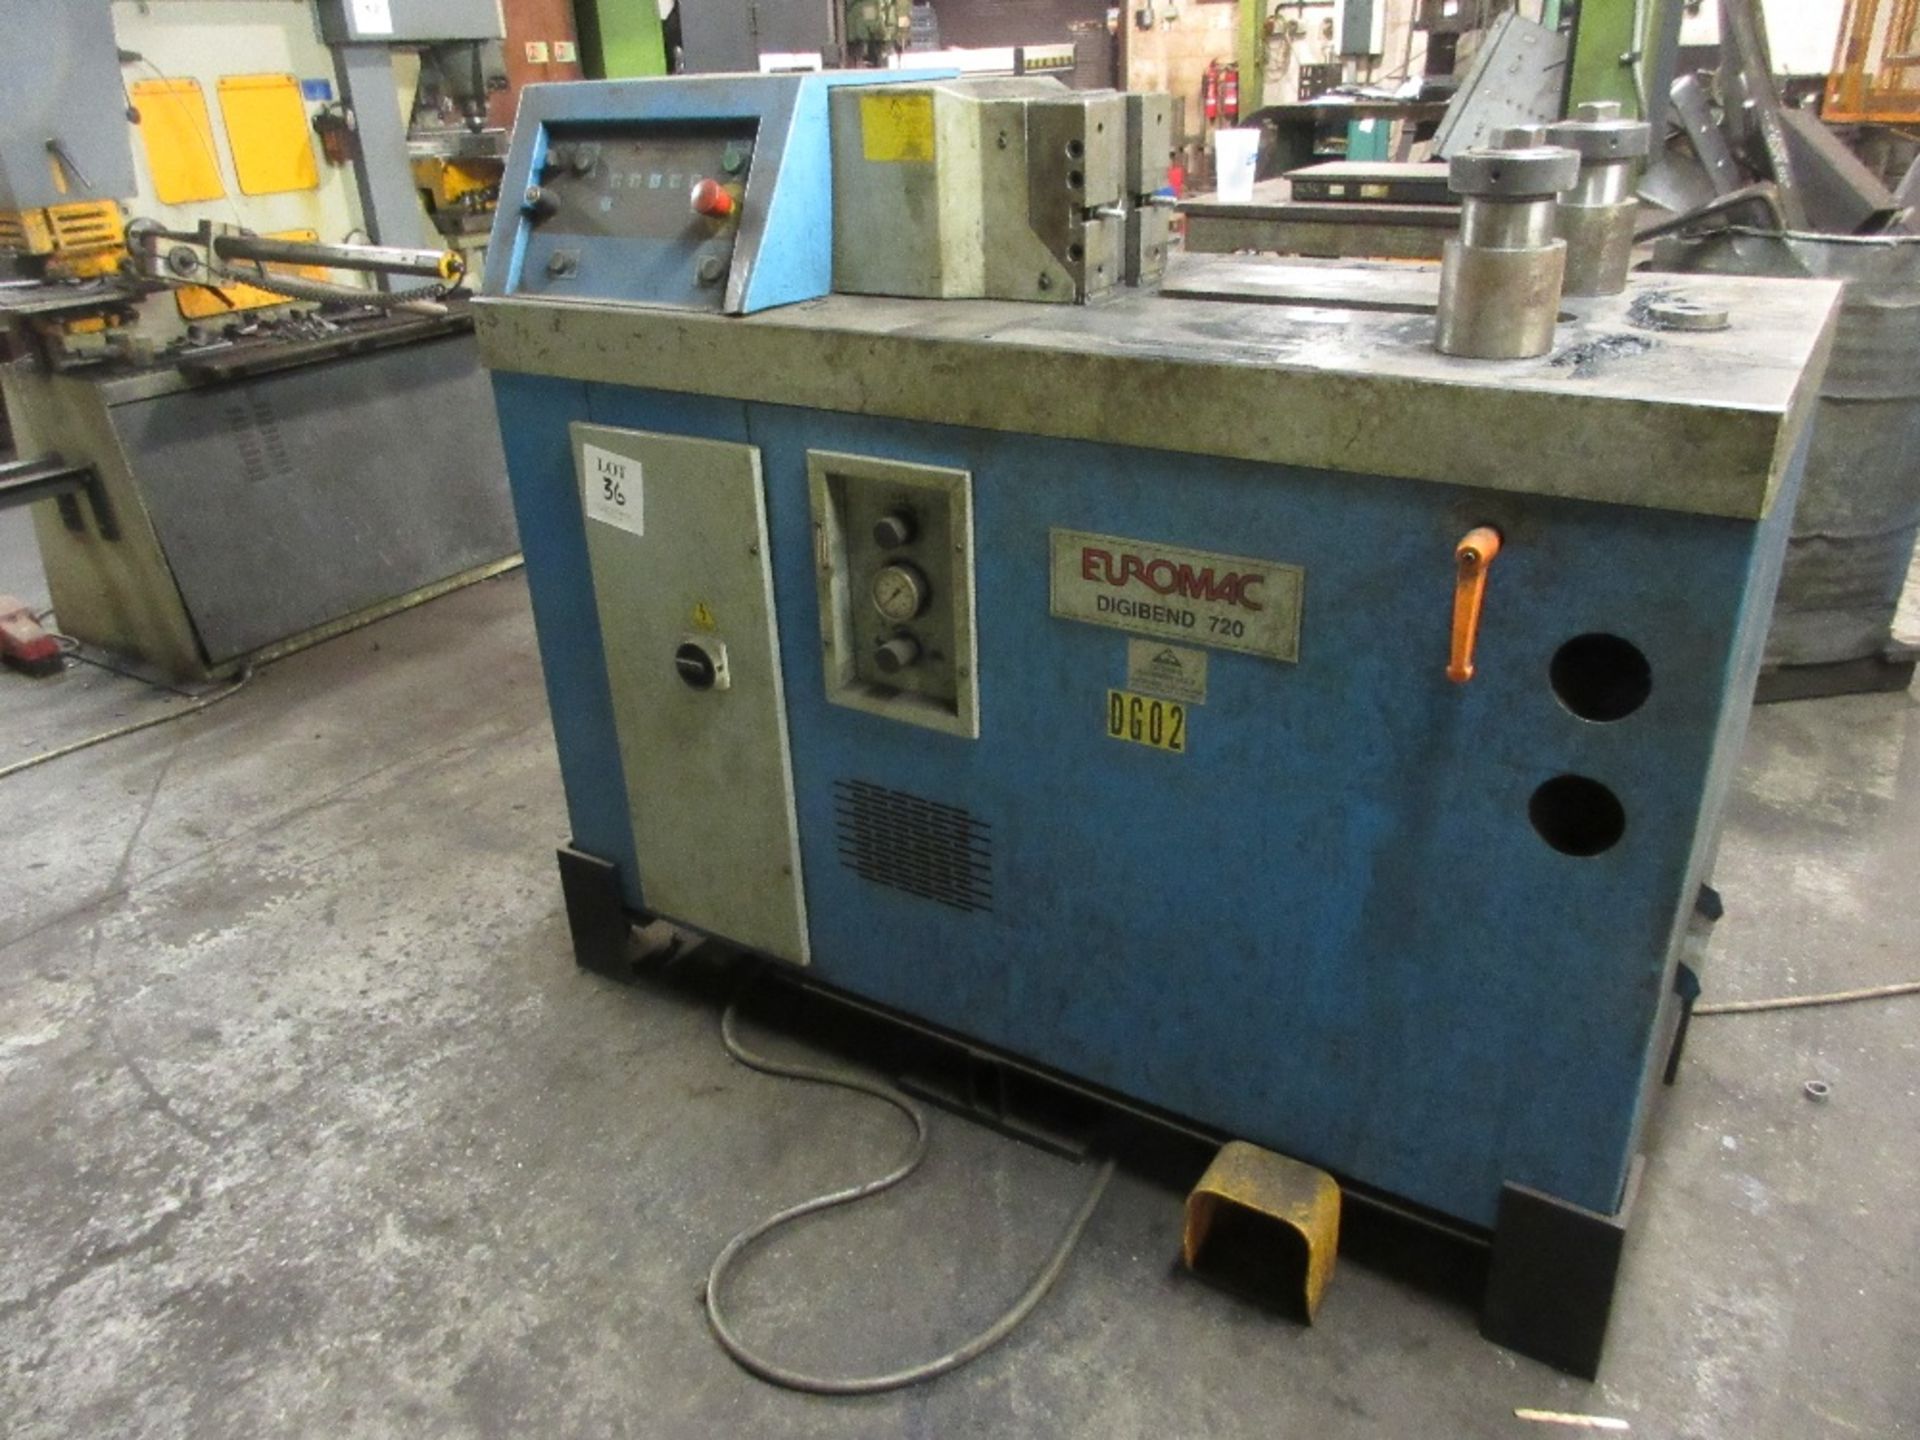 Euromac Digibend720 CNC bending machine. Serial No. 3730203. Year 2003. A Risk Assessment and Method